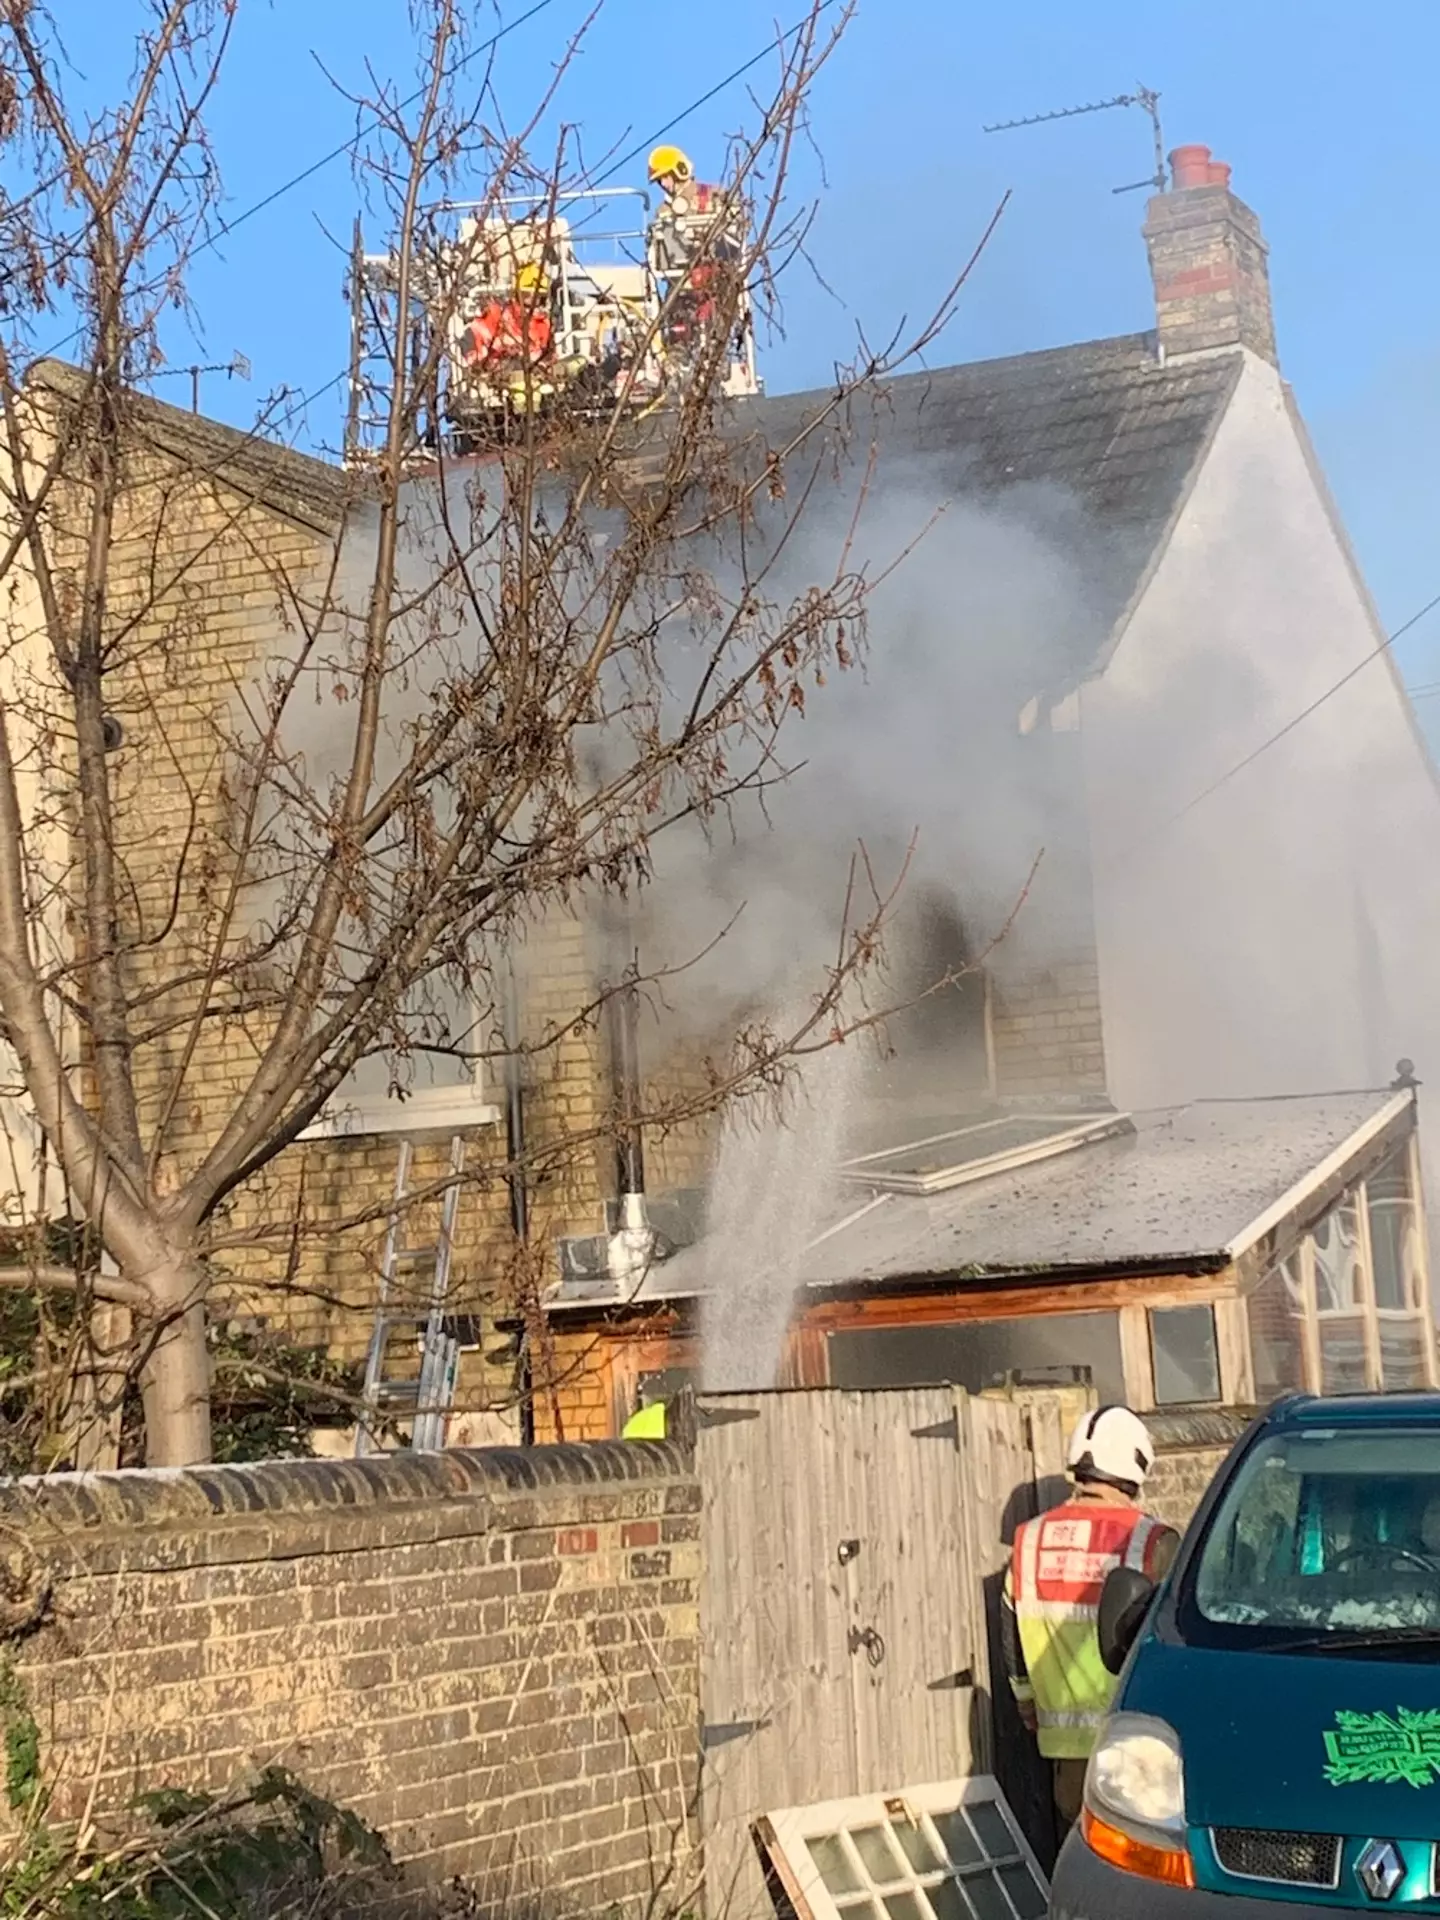 My Mum's neighbour suffered a house fire just before Christmas.